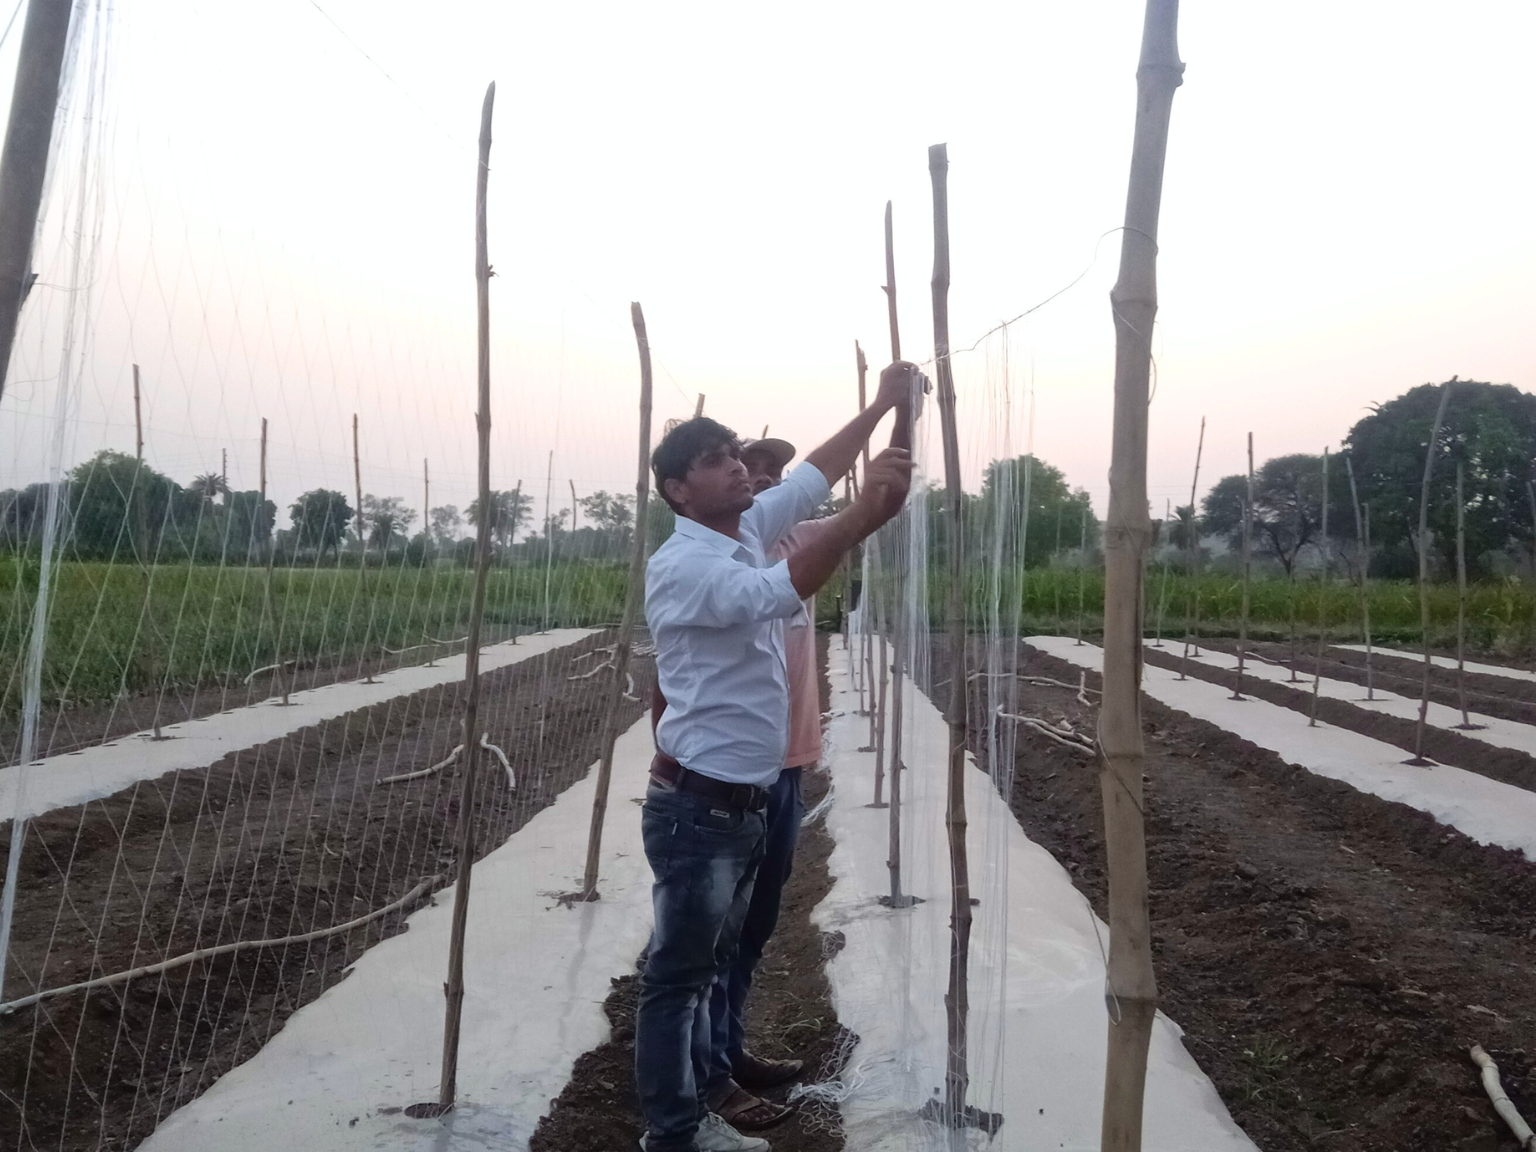 Farmer being trained on how to setup trellis structure